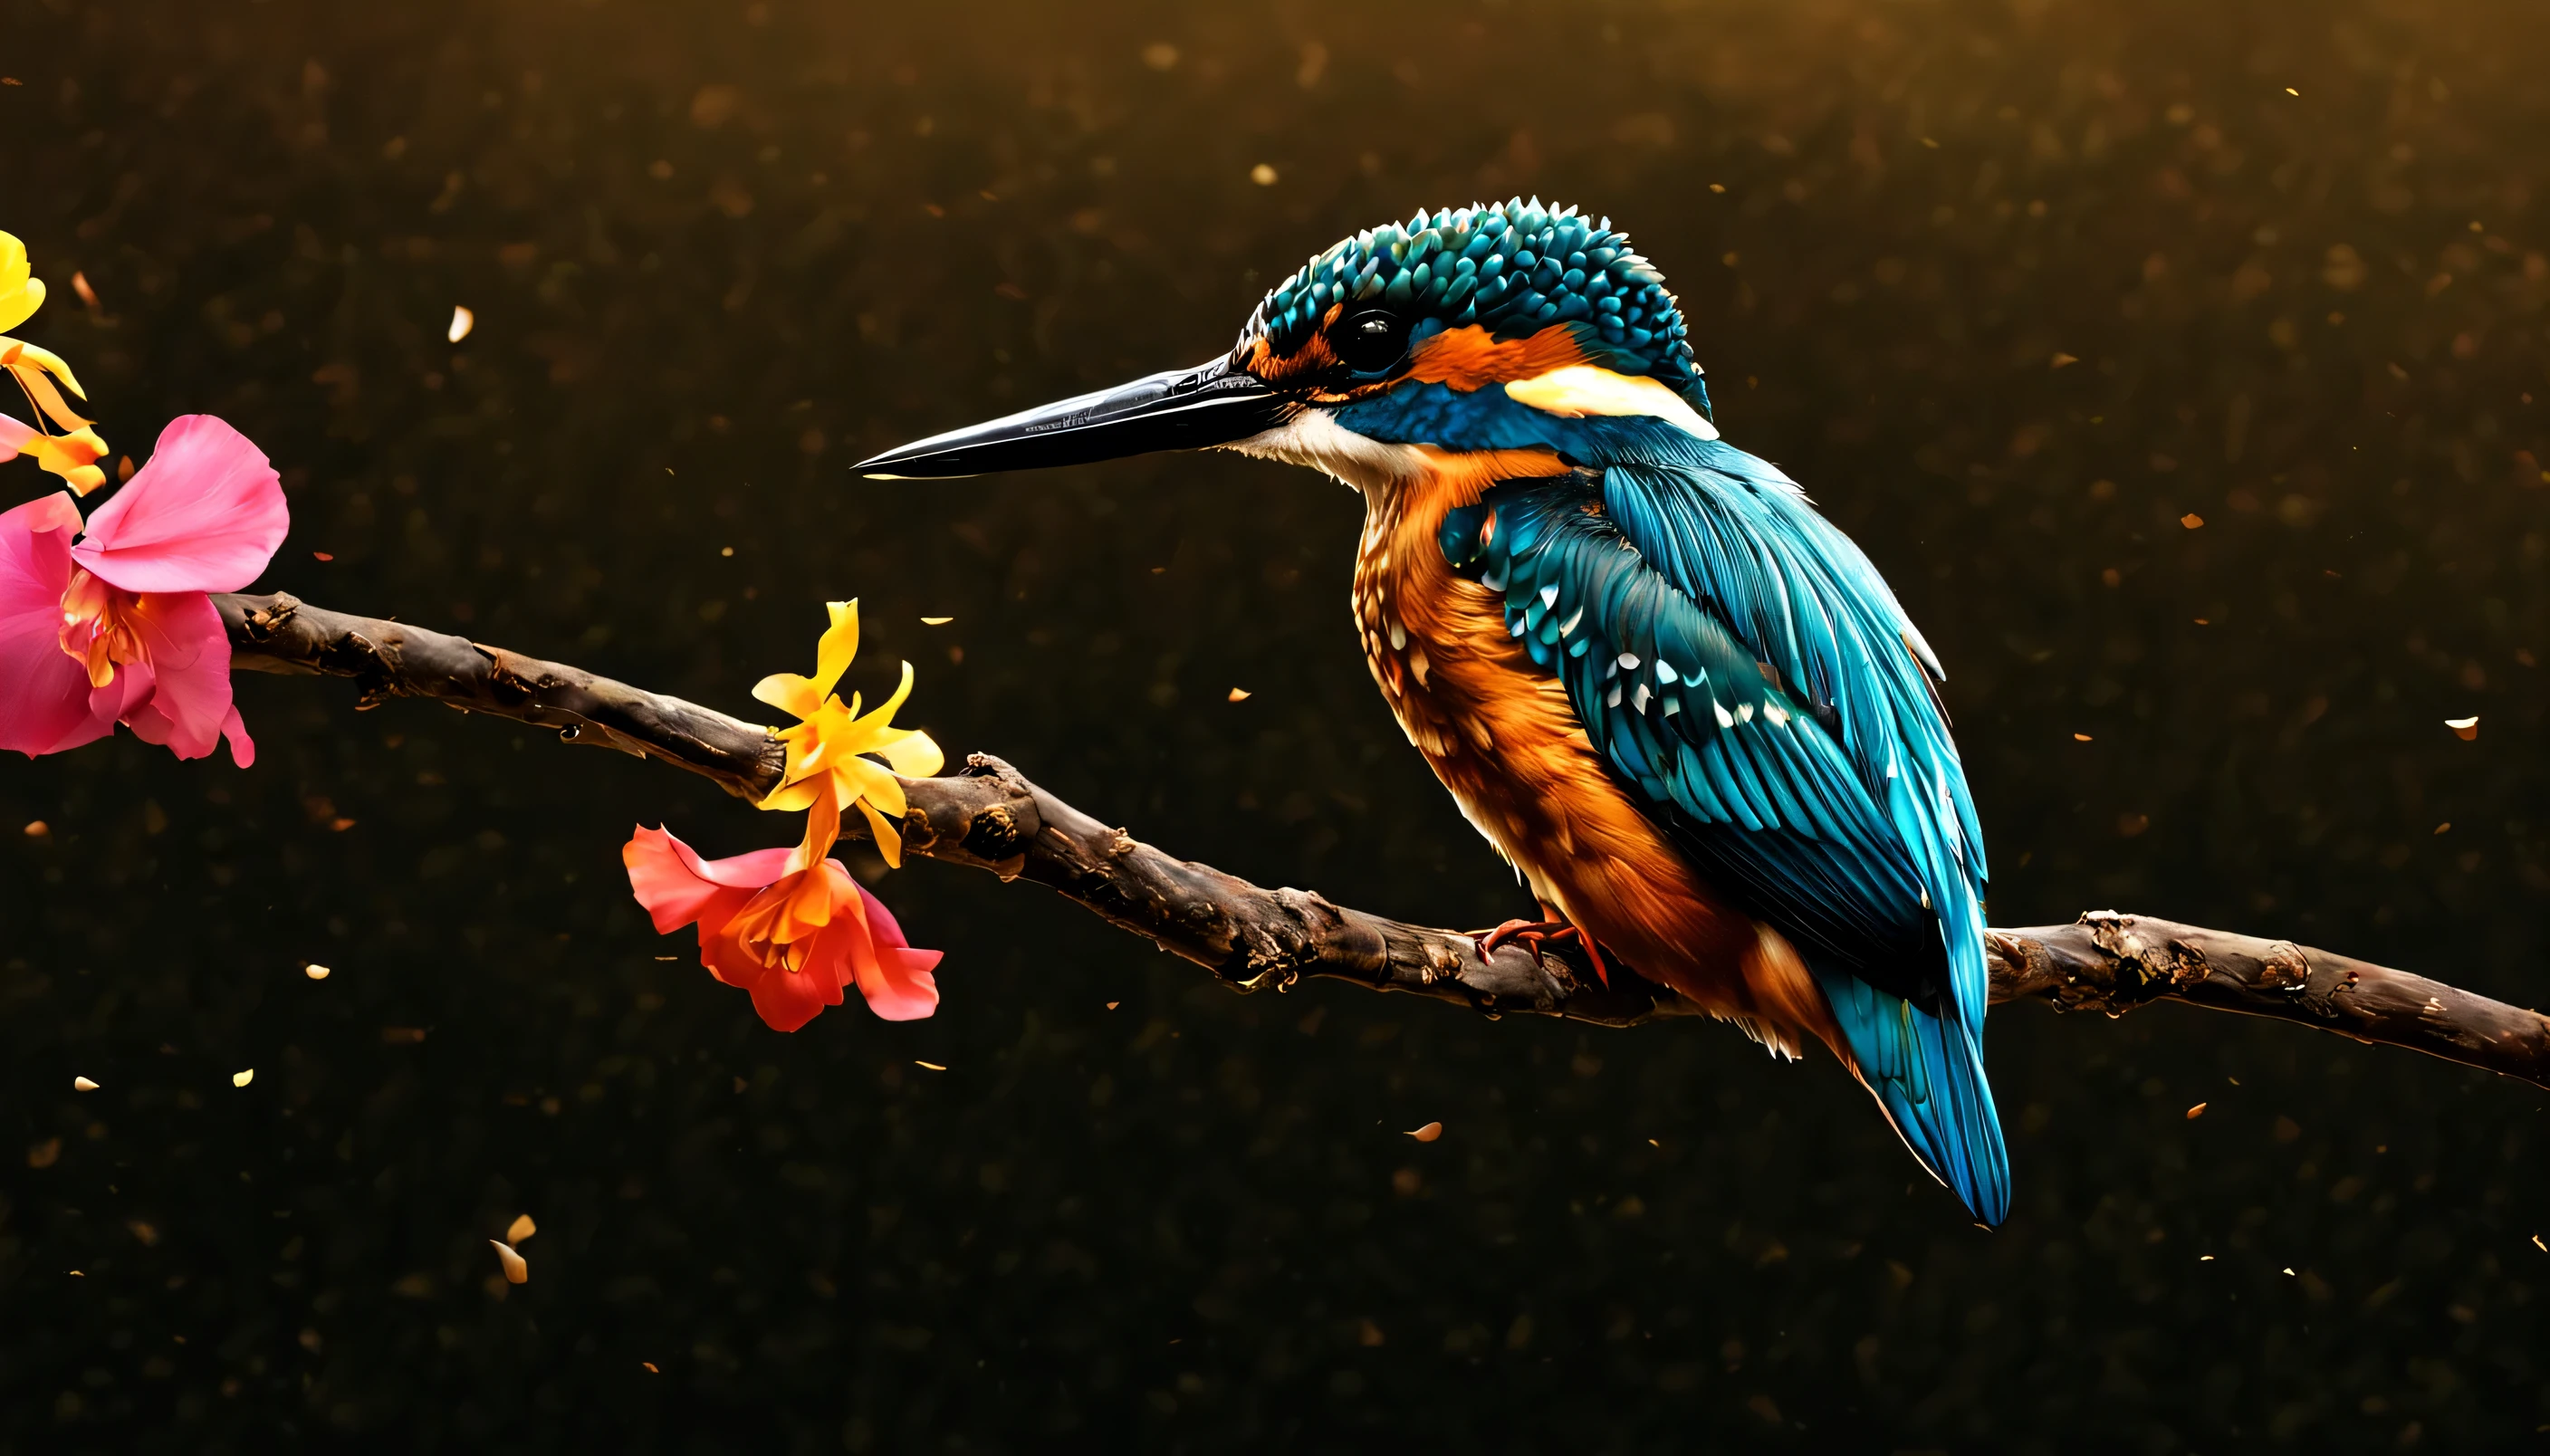 feels，See deeply， A brightly colored kingfisher stands on a branch covered with flowers ,Spiritual feels from National Geographic Magazine ，current ，Spiritual feels from National Geographic Magazine，petals falling